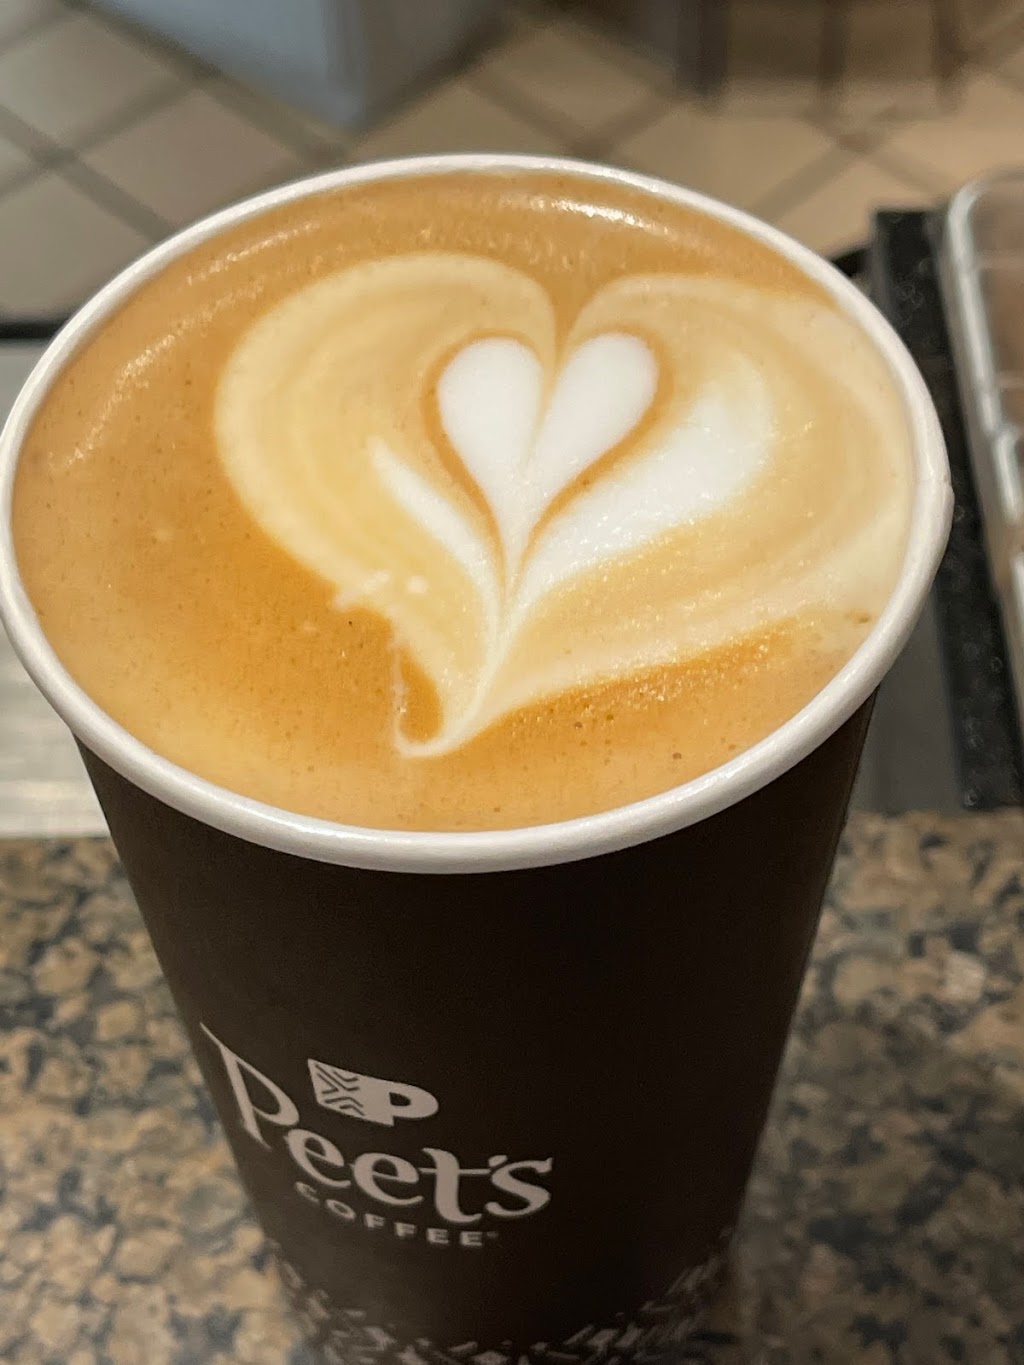 Peets Coffee | Nob Hill Foods, 1250 Grant Rd, Mountain View, CA 94040 | Phone: (650) 390-9205